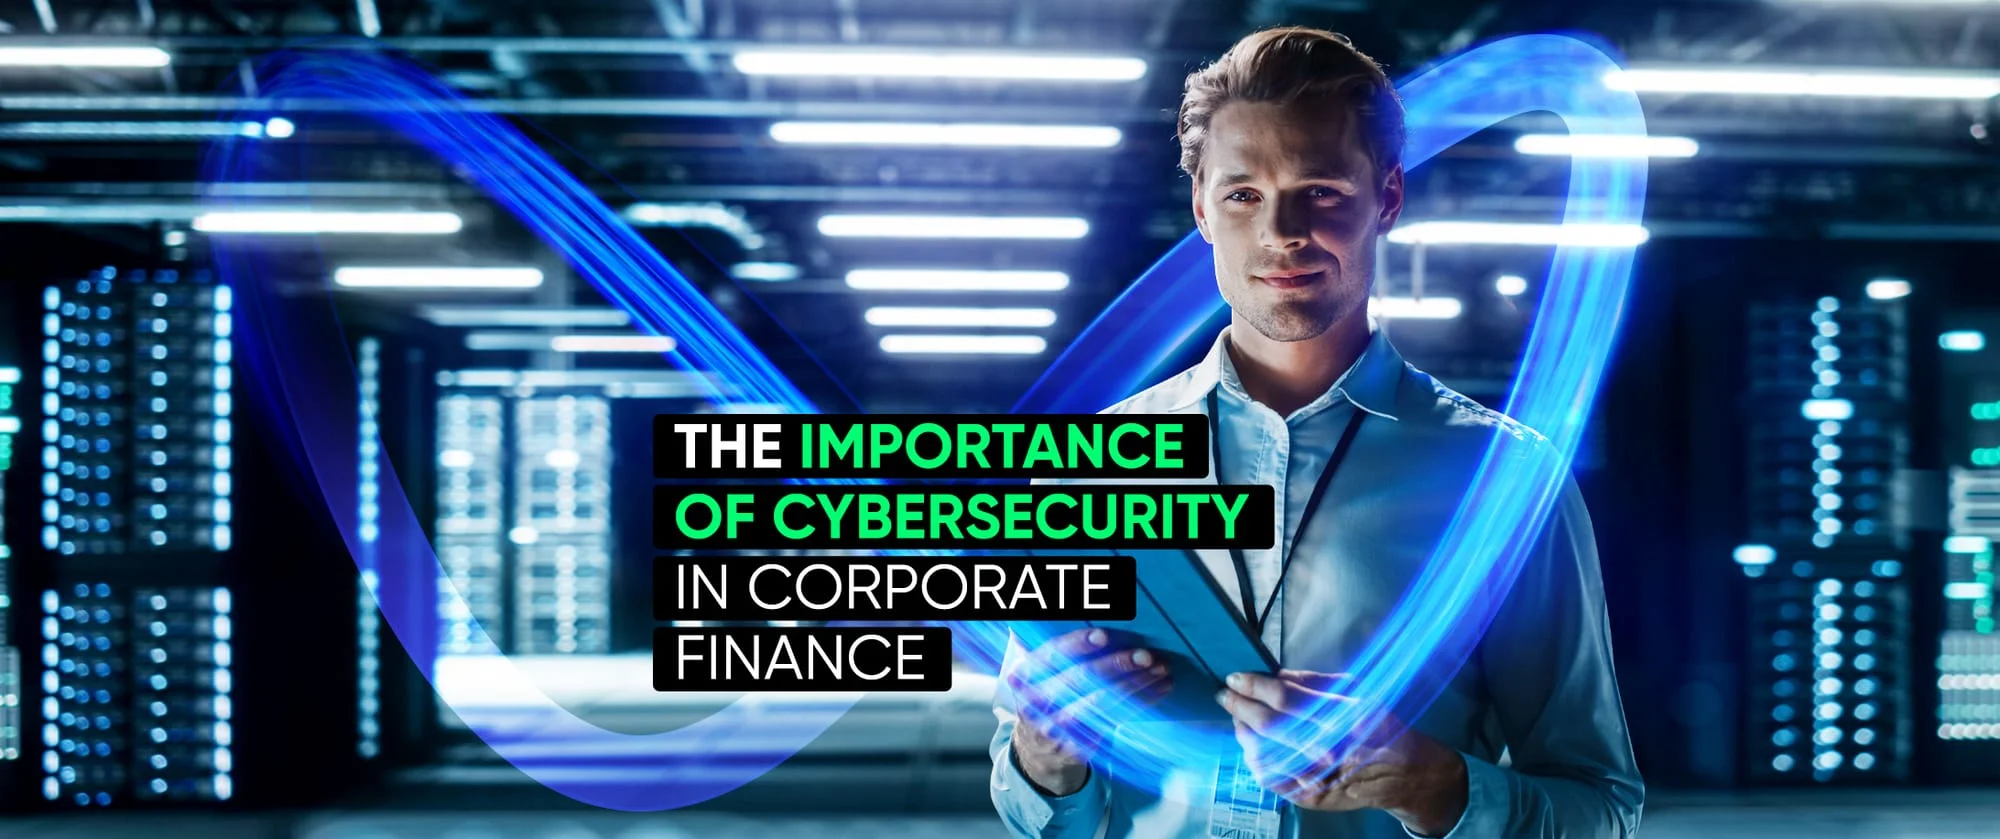 The Importance of Cybersecurity in Corporate Finance